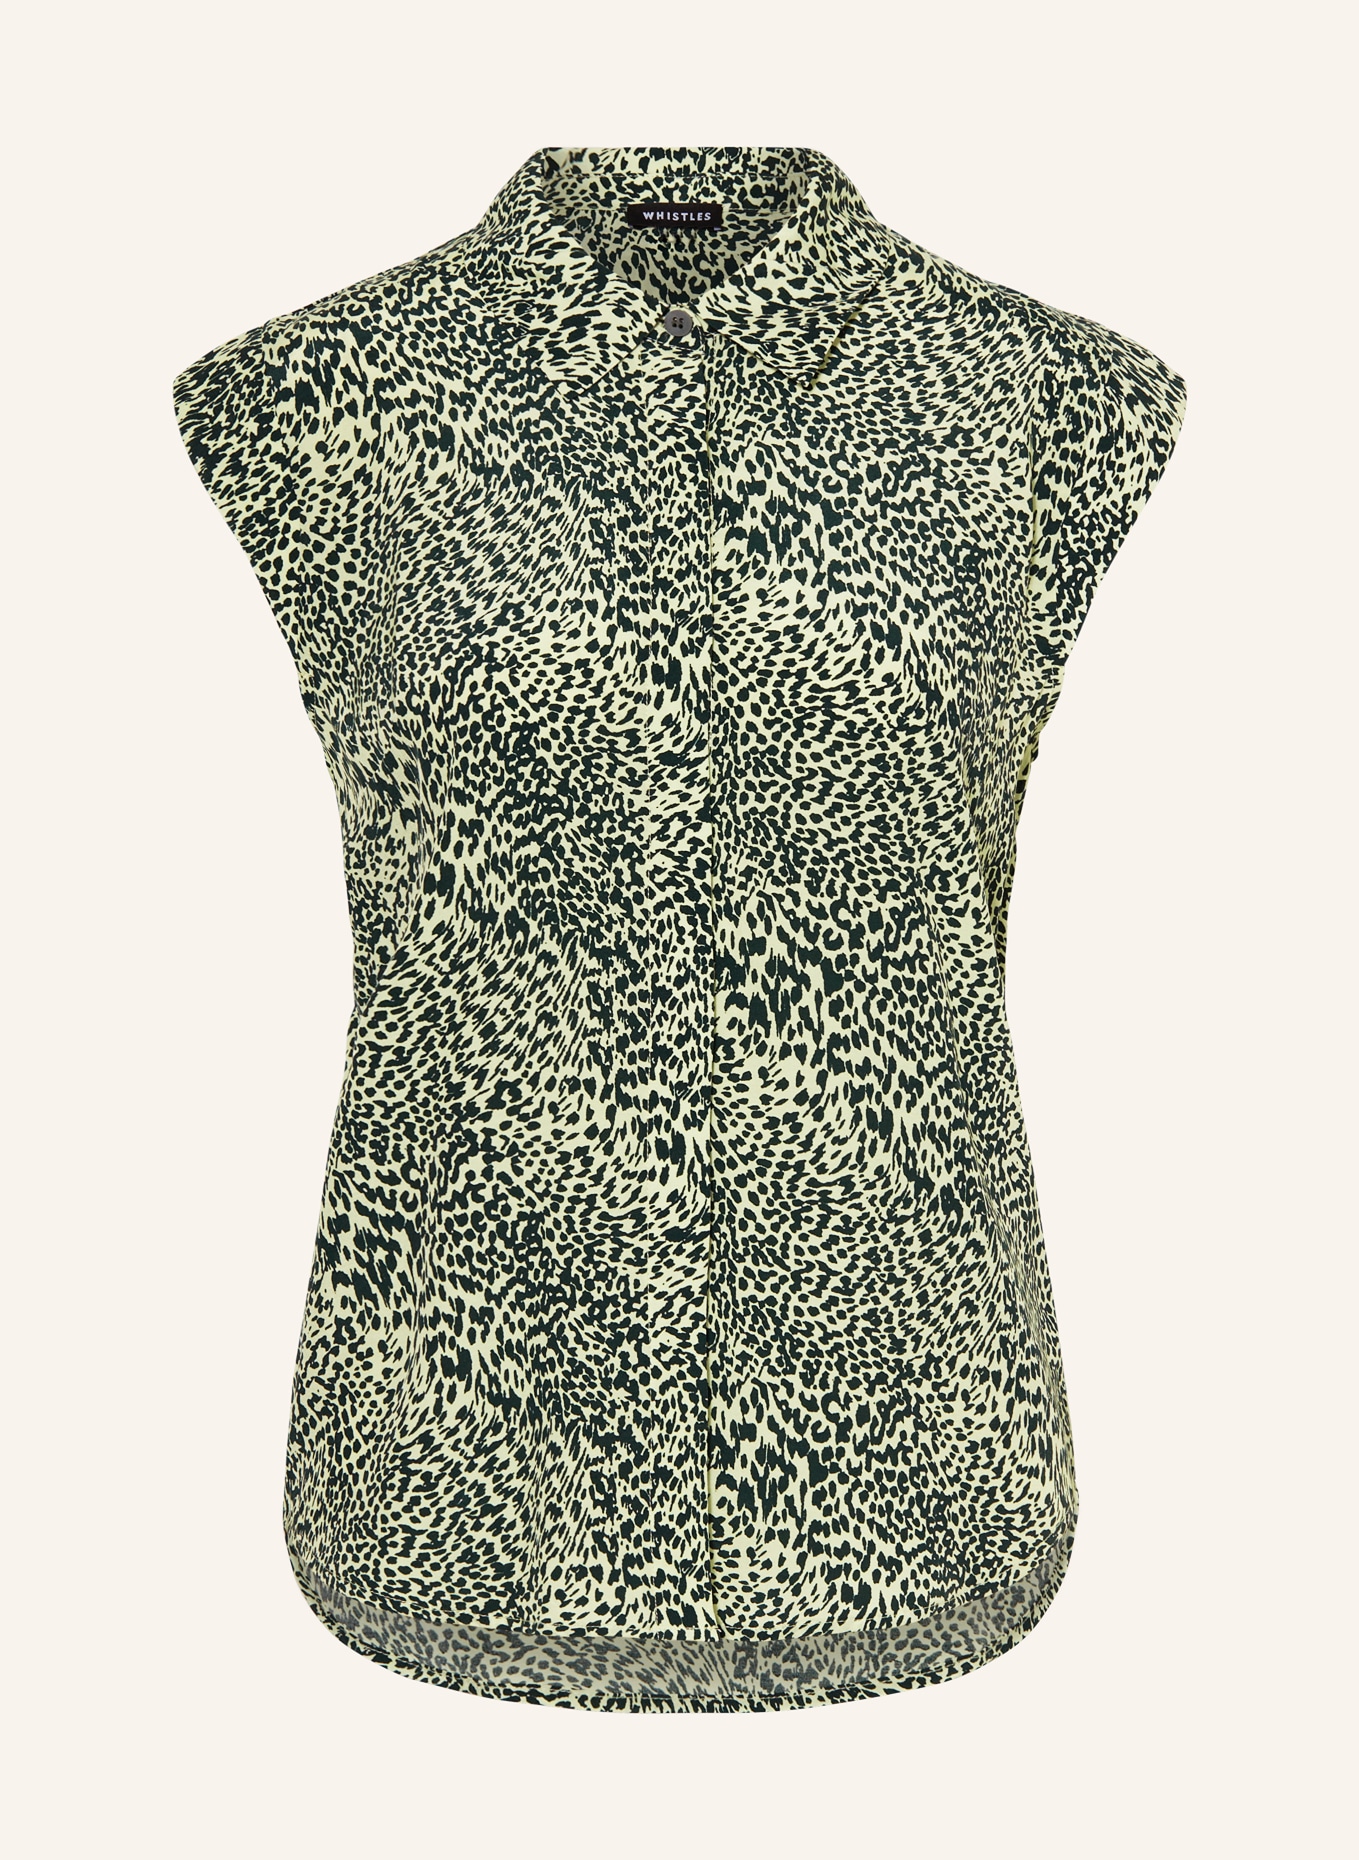 WHISTLES Blouse top, Color: LIGHT GREEN/ DARK GREEN (Image 1)